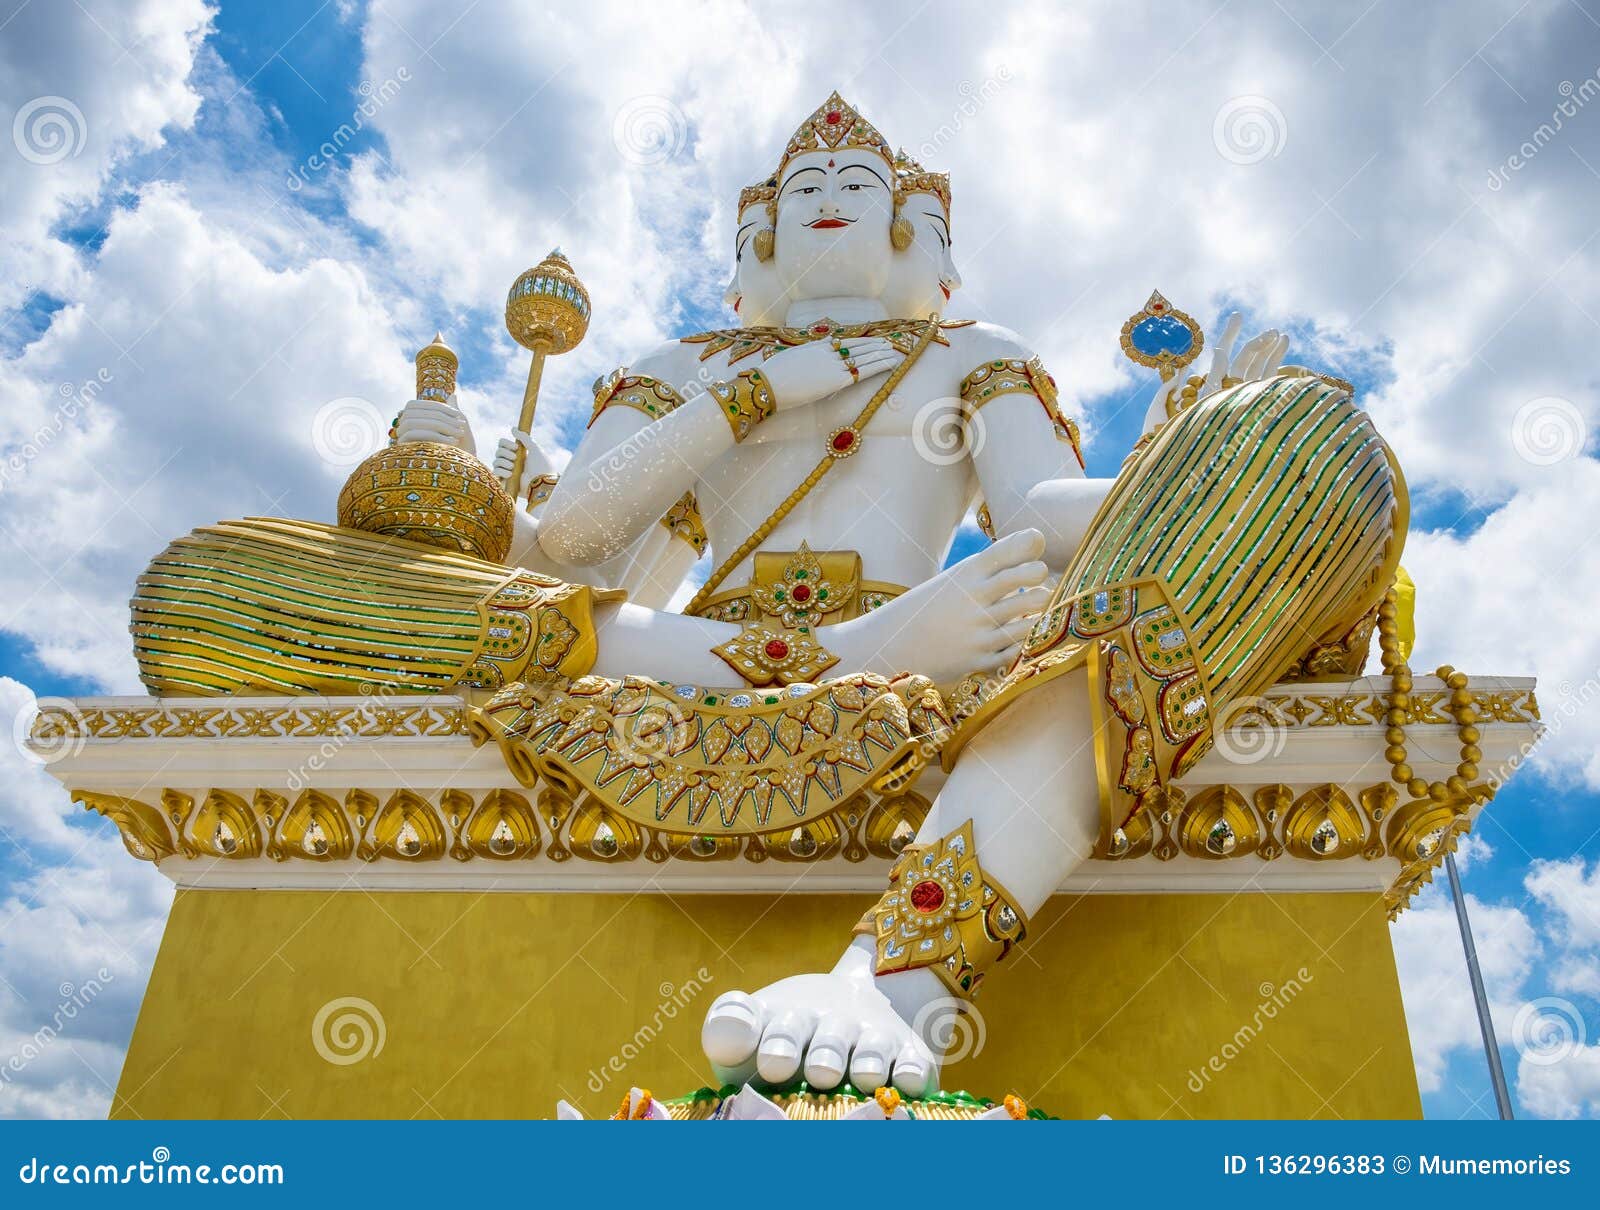 Chachoengsao,Thailand - Aug 24 2015 : God Brahma Large Statue in Front ...